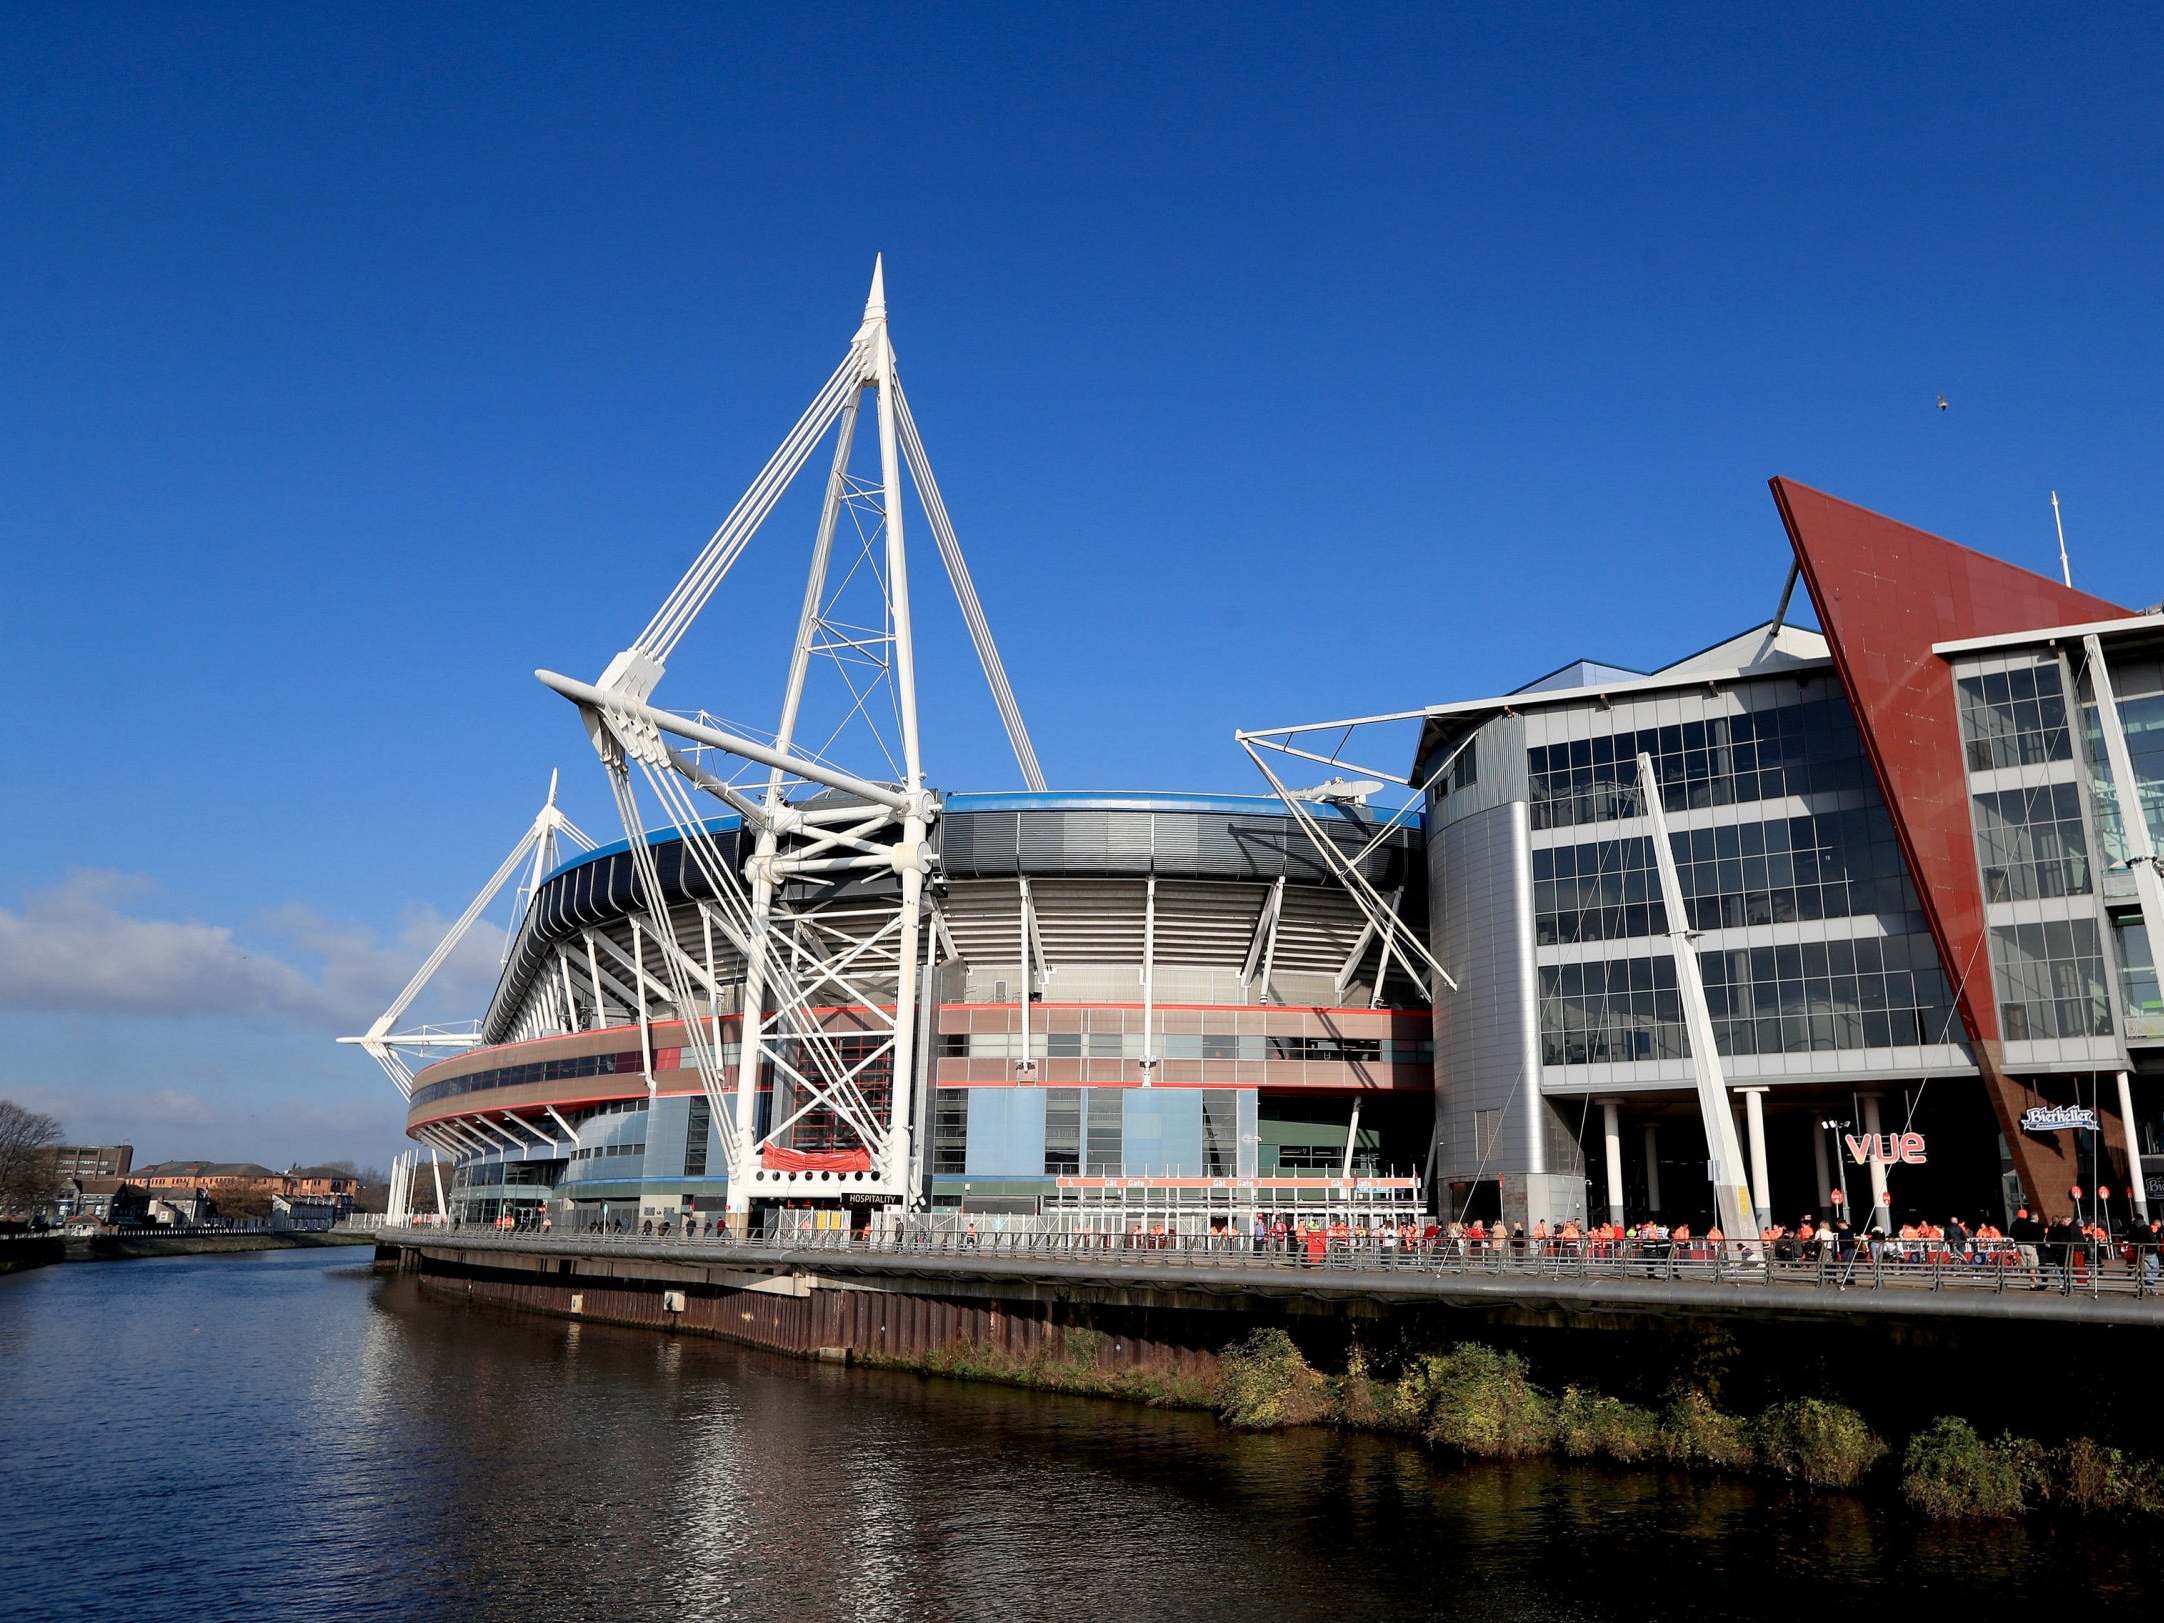 Coronavirus: Principality Stadium to be used as NHS field hospital to home 2,000 additional beds